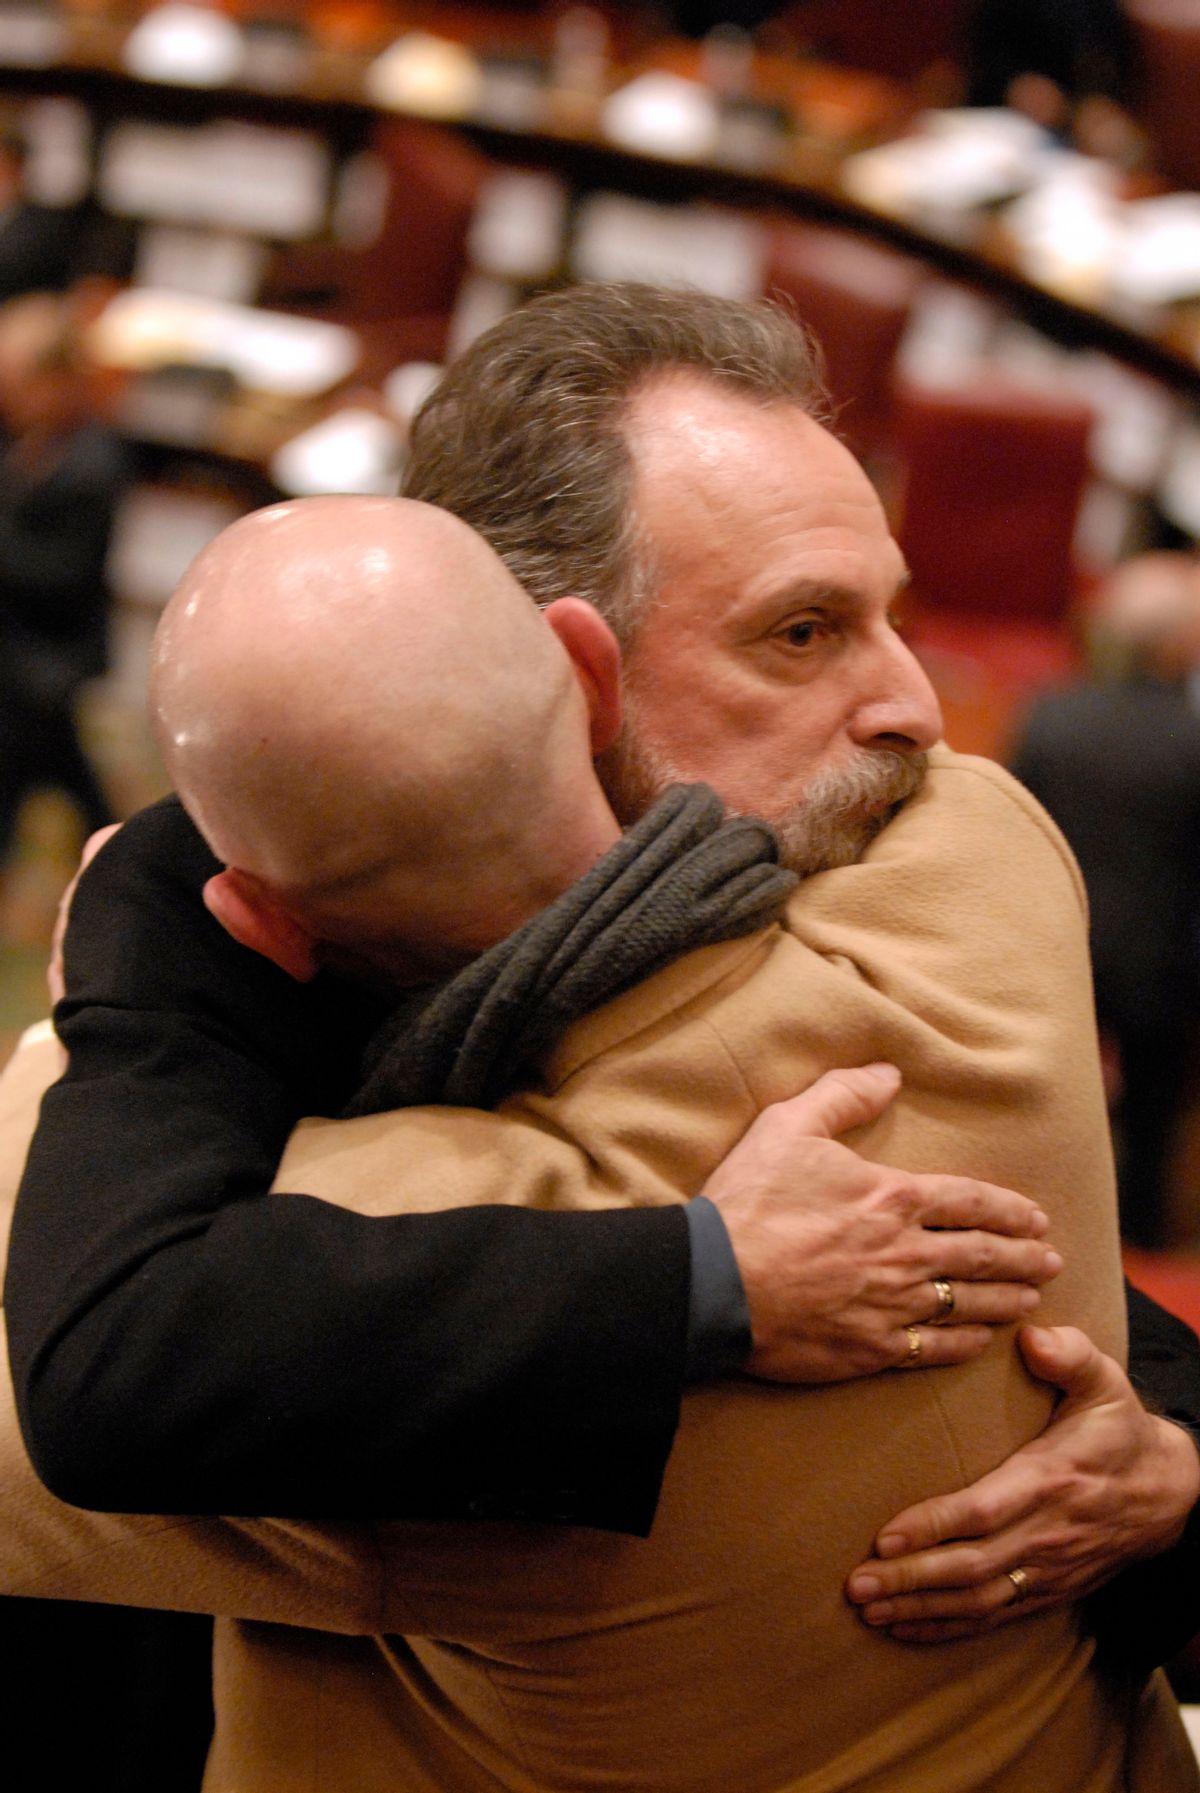 Thomas Sabatino, facing right, of Yonkers, N.Y., consoles Robert Voorheis, his partner of 31 years, after same-sex marriage legislation was defeated in the New York state Senate at the Capitol  N.Y., on Wednesday, Dec. 2, 2009.   Senators voted 38-24 against the bill.  (AP Photo/Tim Roske) (Tim Roske)